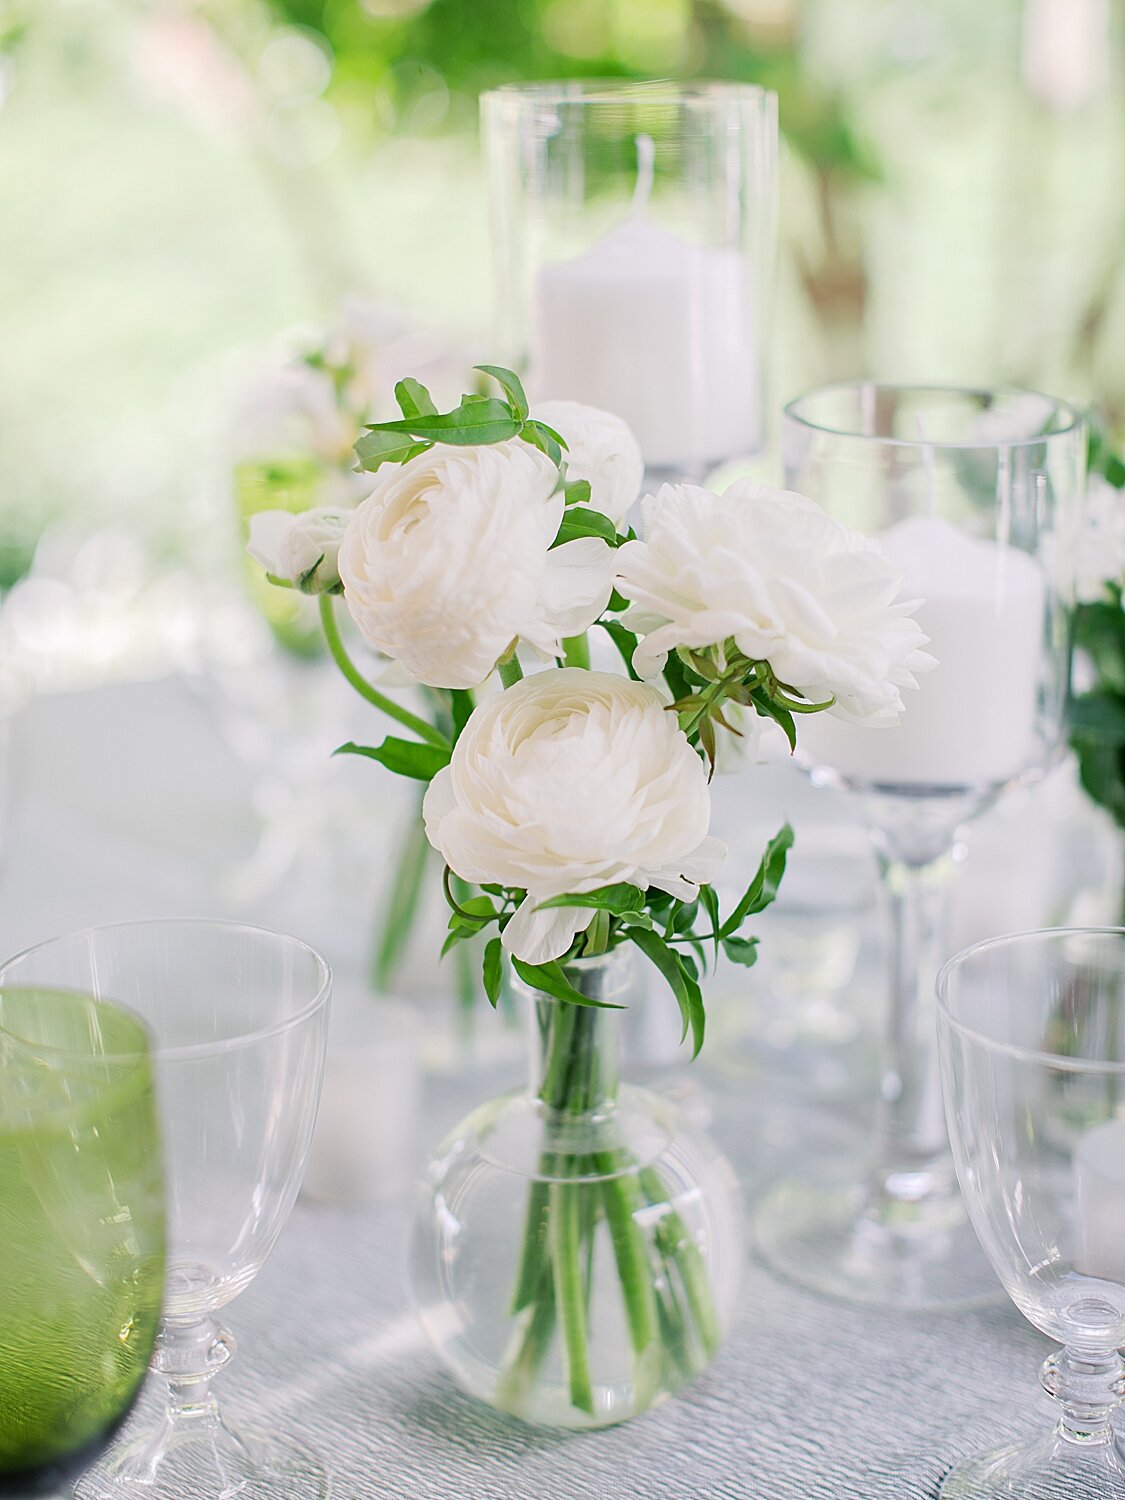 centerpieces for private estate wedding | Stylish Private Home Wedding Inspiration | Asher Gardner Photography